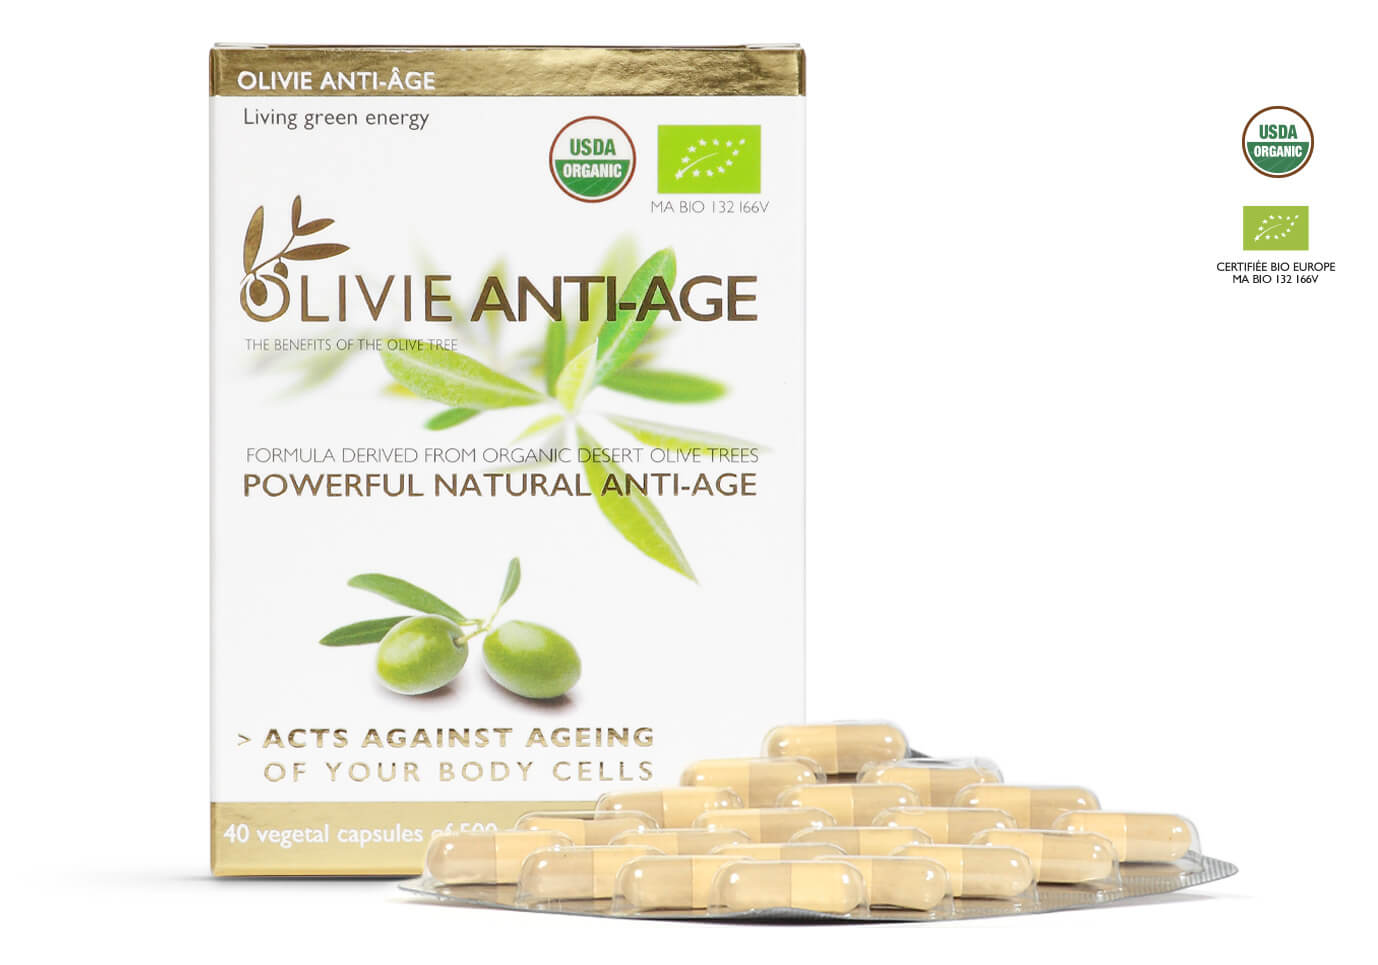 With its powerful polyphenols OLIVIE ANTI-AGE is organic and promotes active rejuvenation of your body cells.